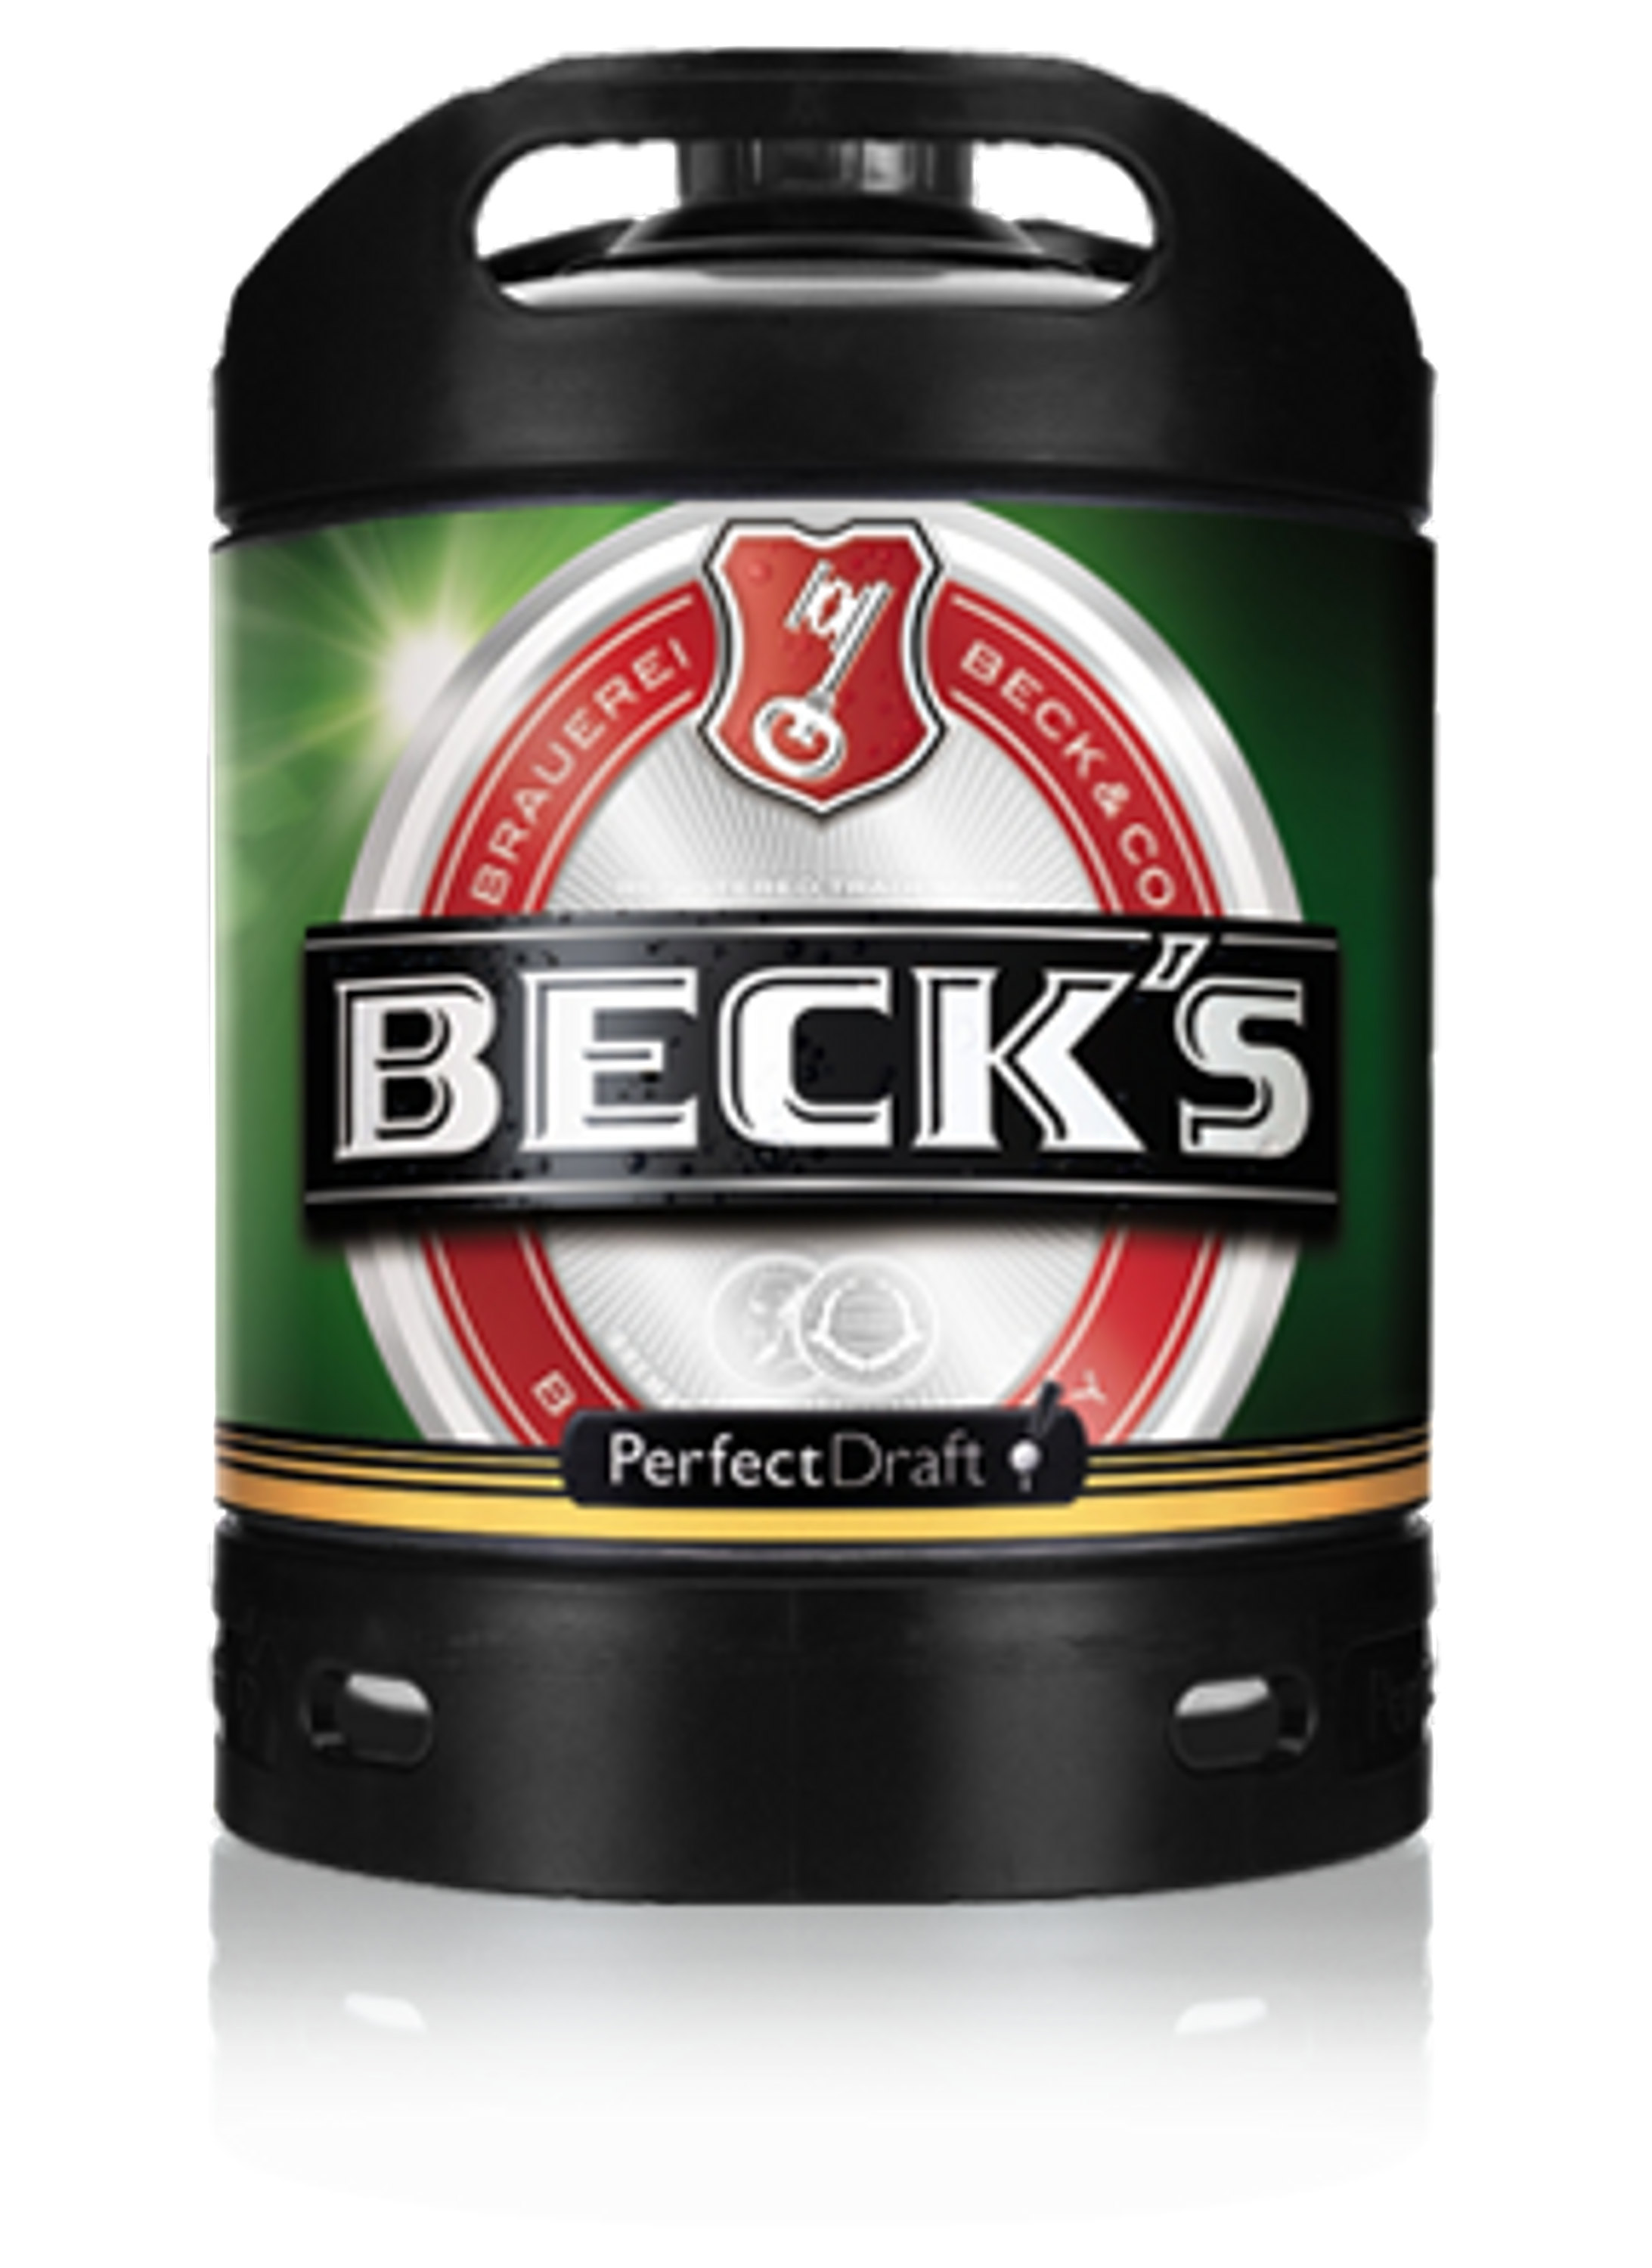 4x Beck's Pils Perfect Draft 6.0l, alc. 4.9% by volume